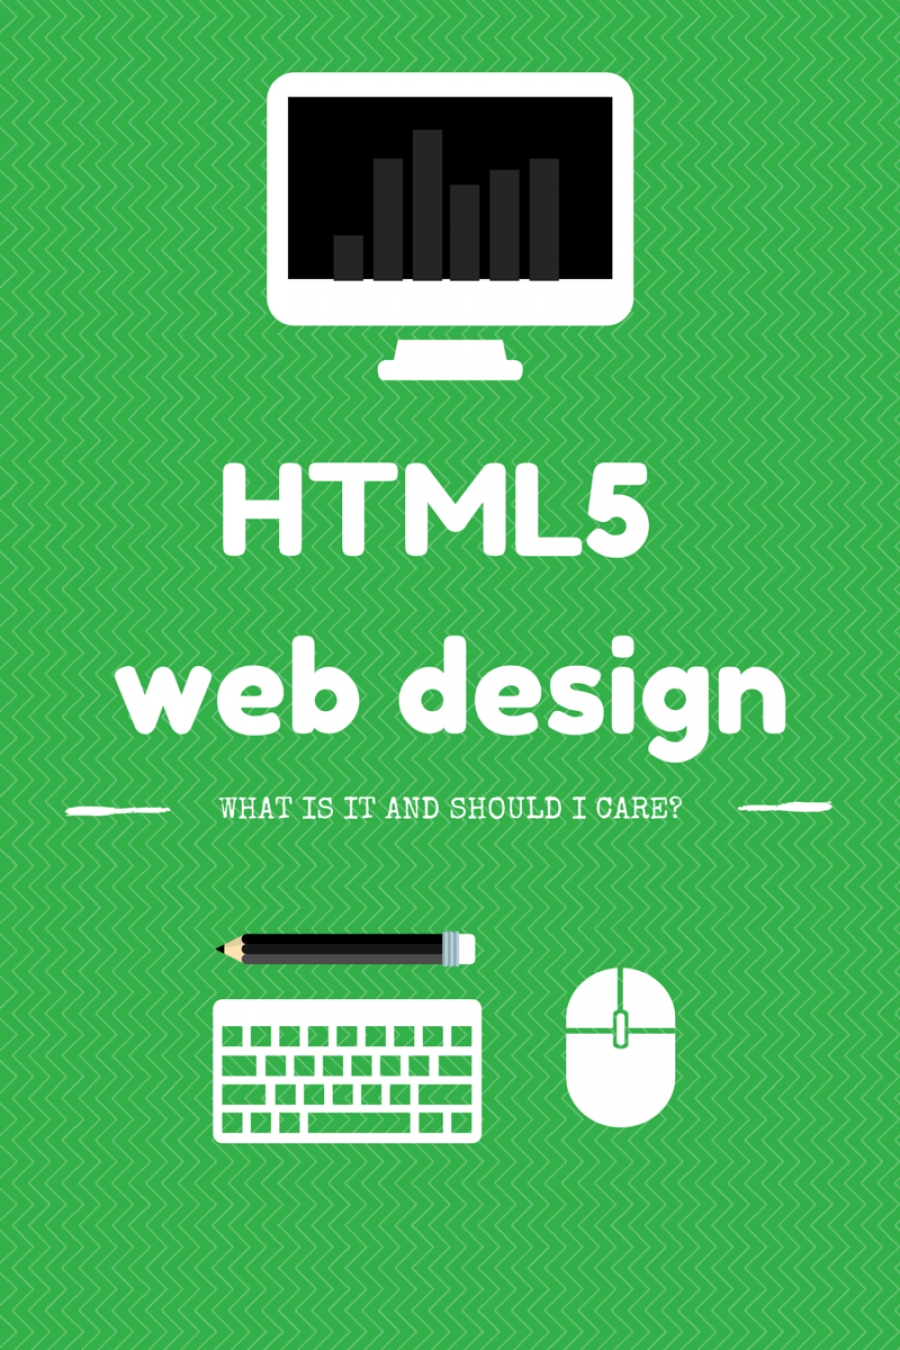 What is HTML5 Web Design and Should I Care?